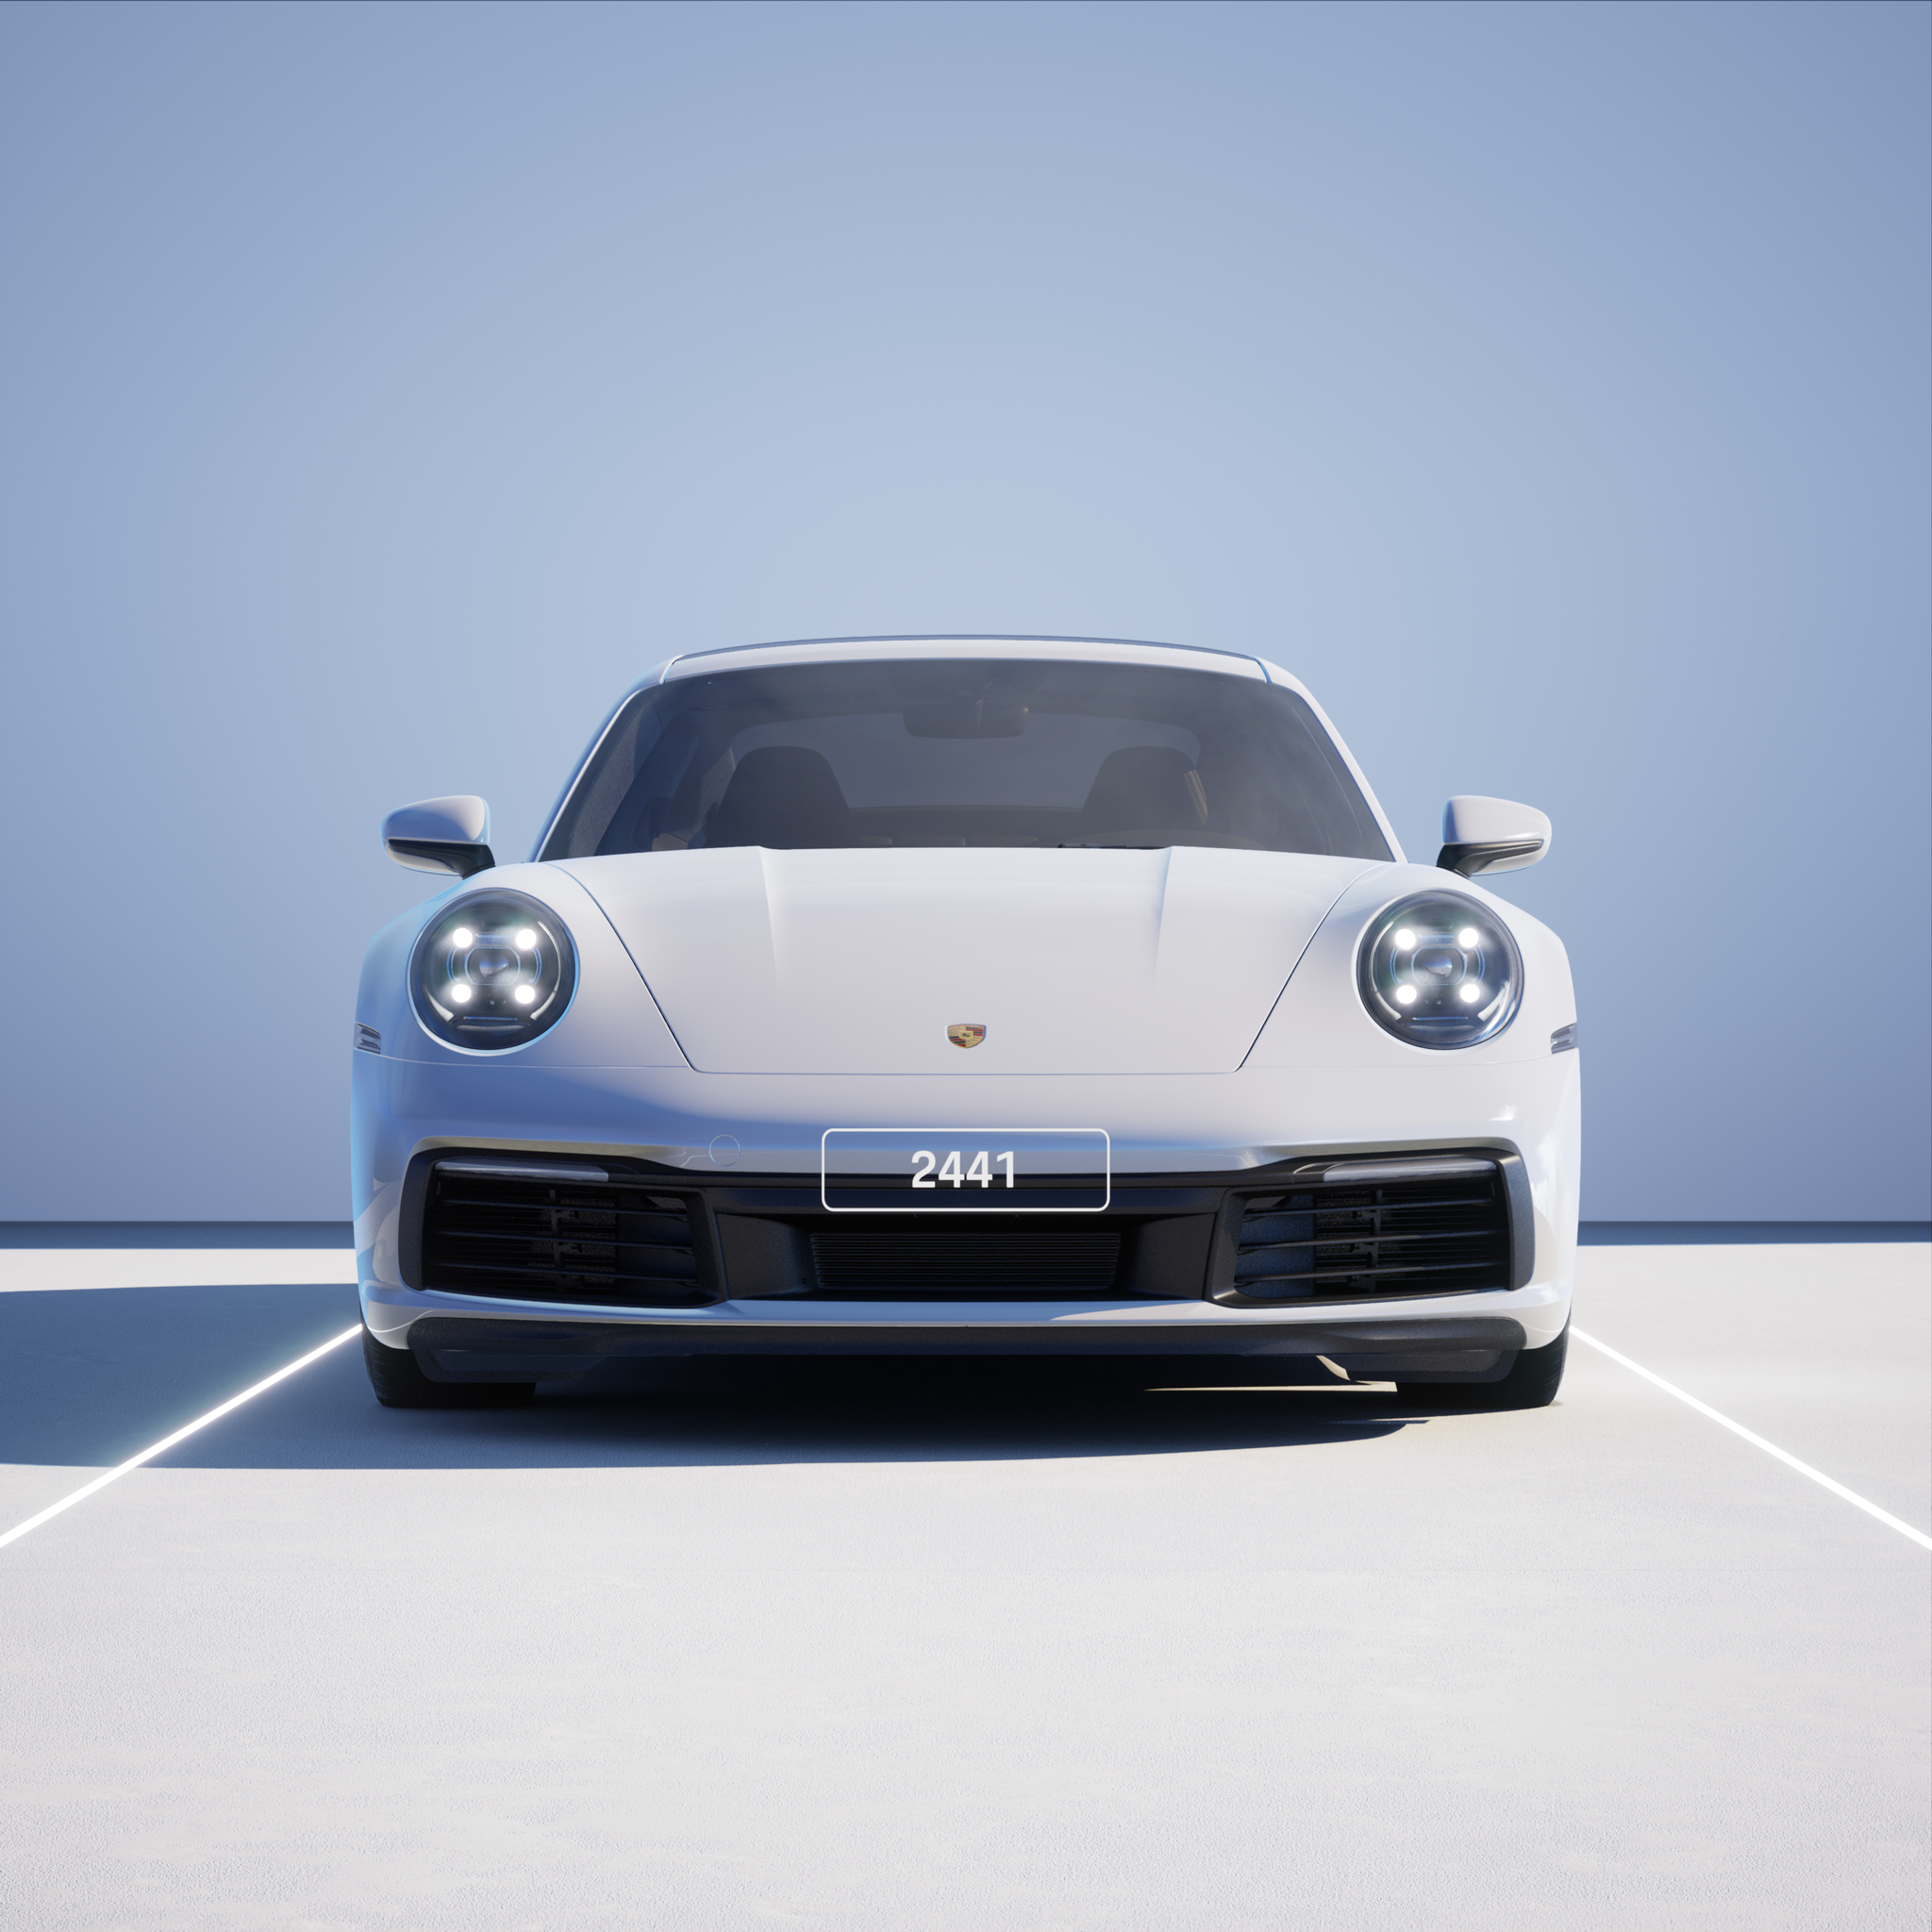 The PORSCHΞ 911 2441 image in phase